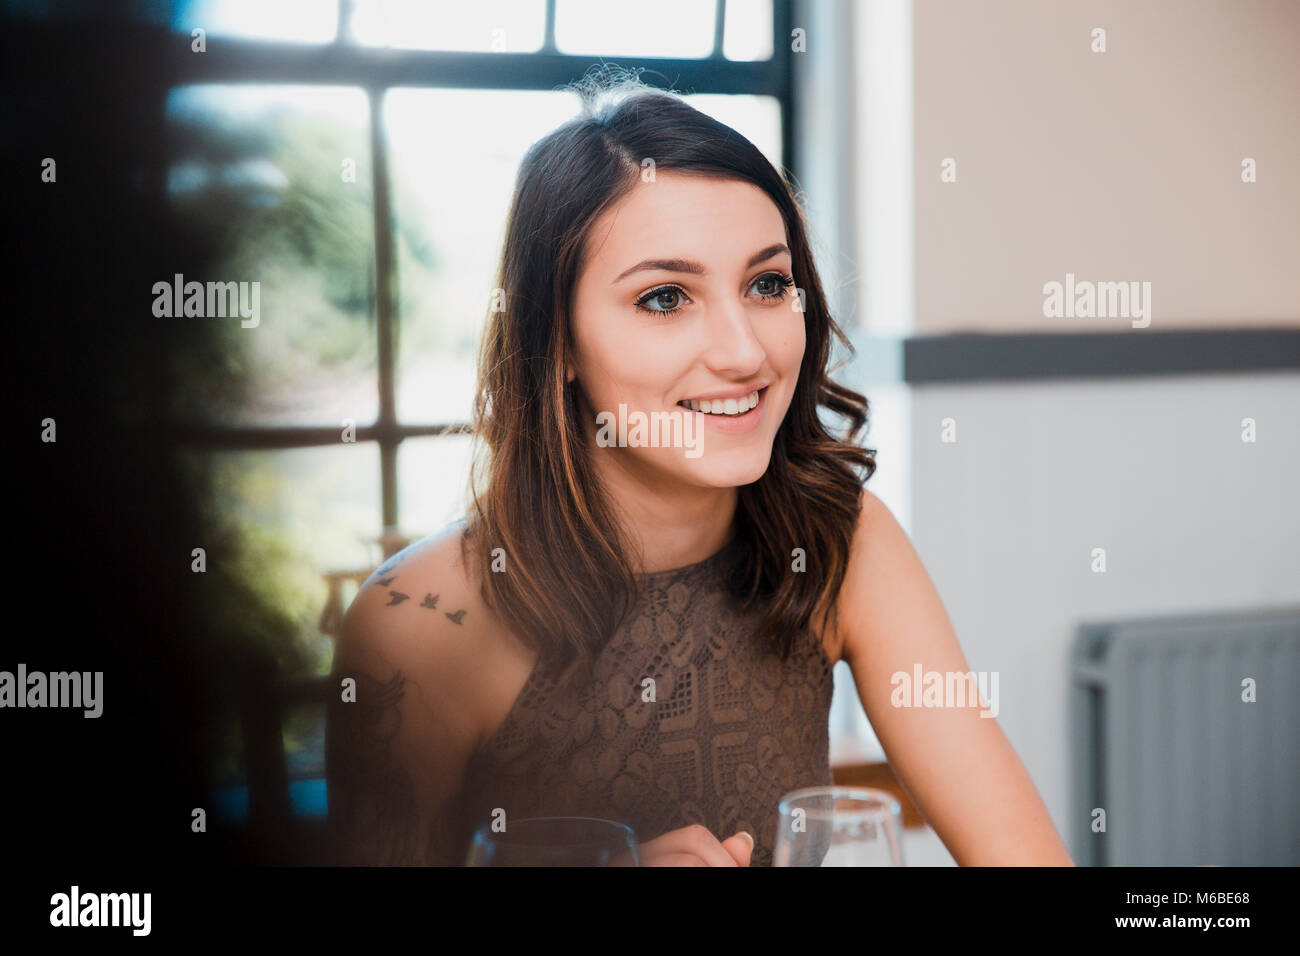 Young women is enjoying herself at a social event with friends. They are drinking wine. Stock Photo